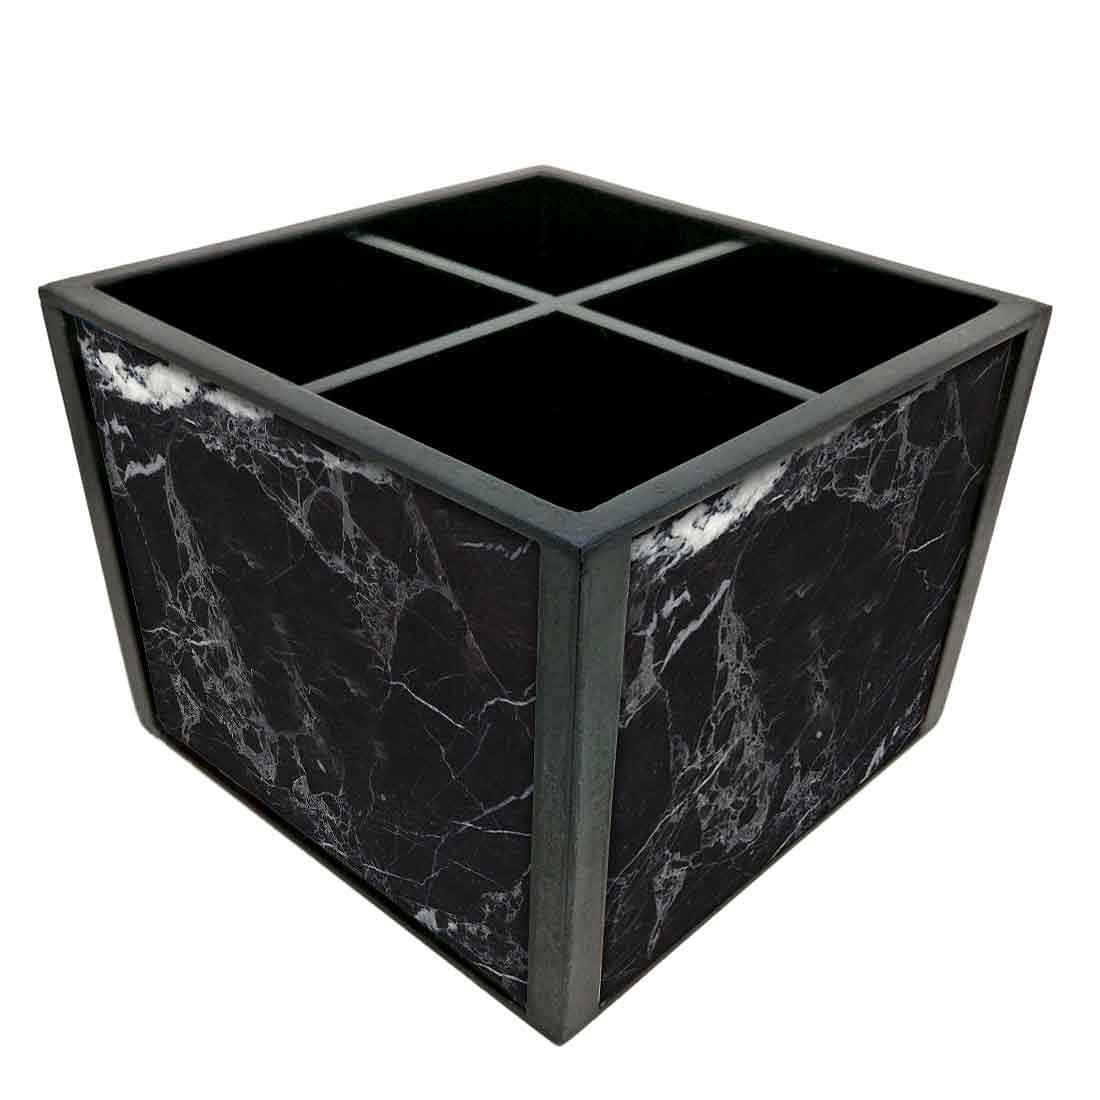 Classy Wooden Cutlery Holder for Dinning Table Organizer - Black Marble Nutcase